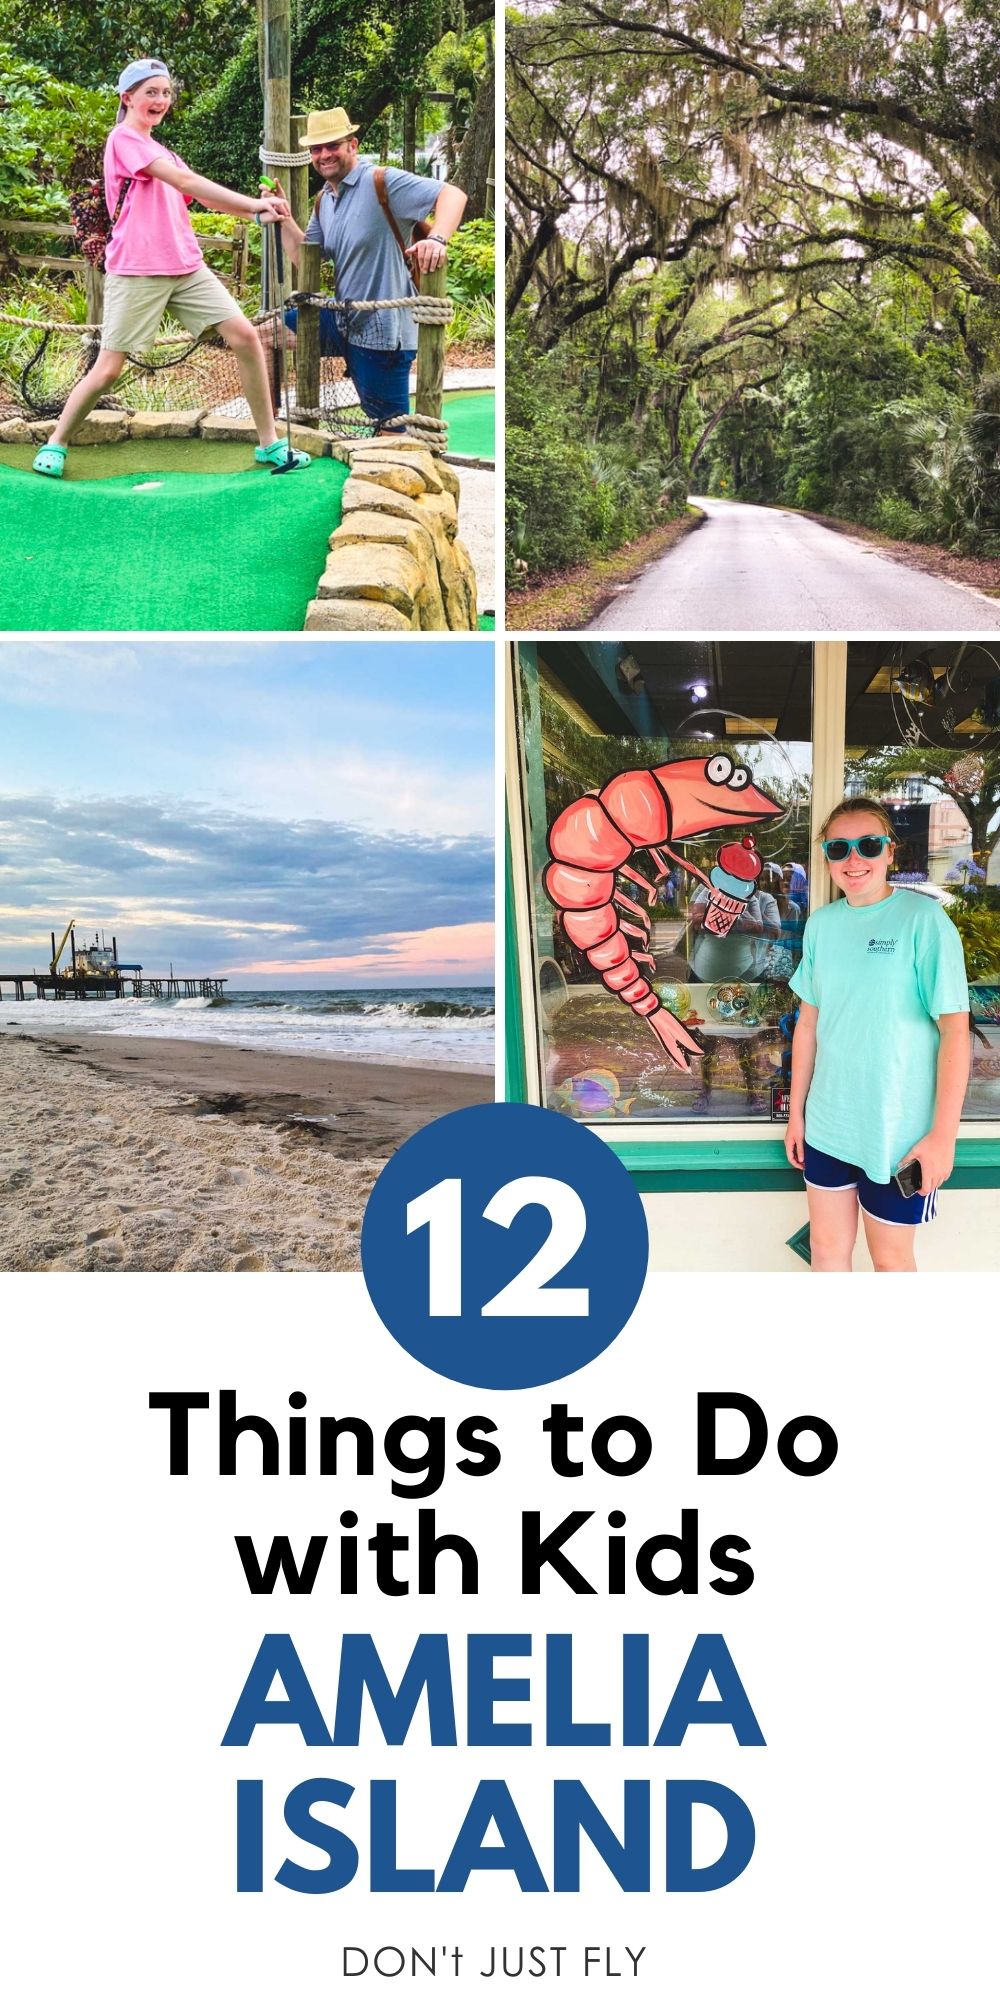 A photo collage shows several kid-friendly activities.